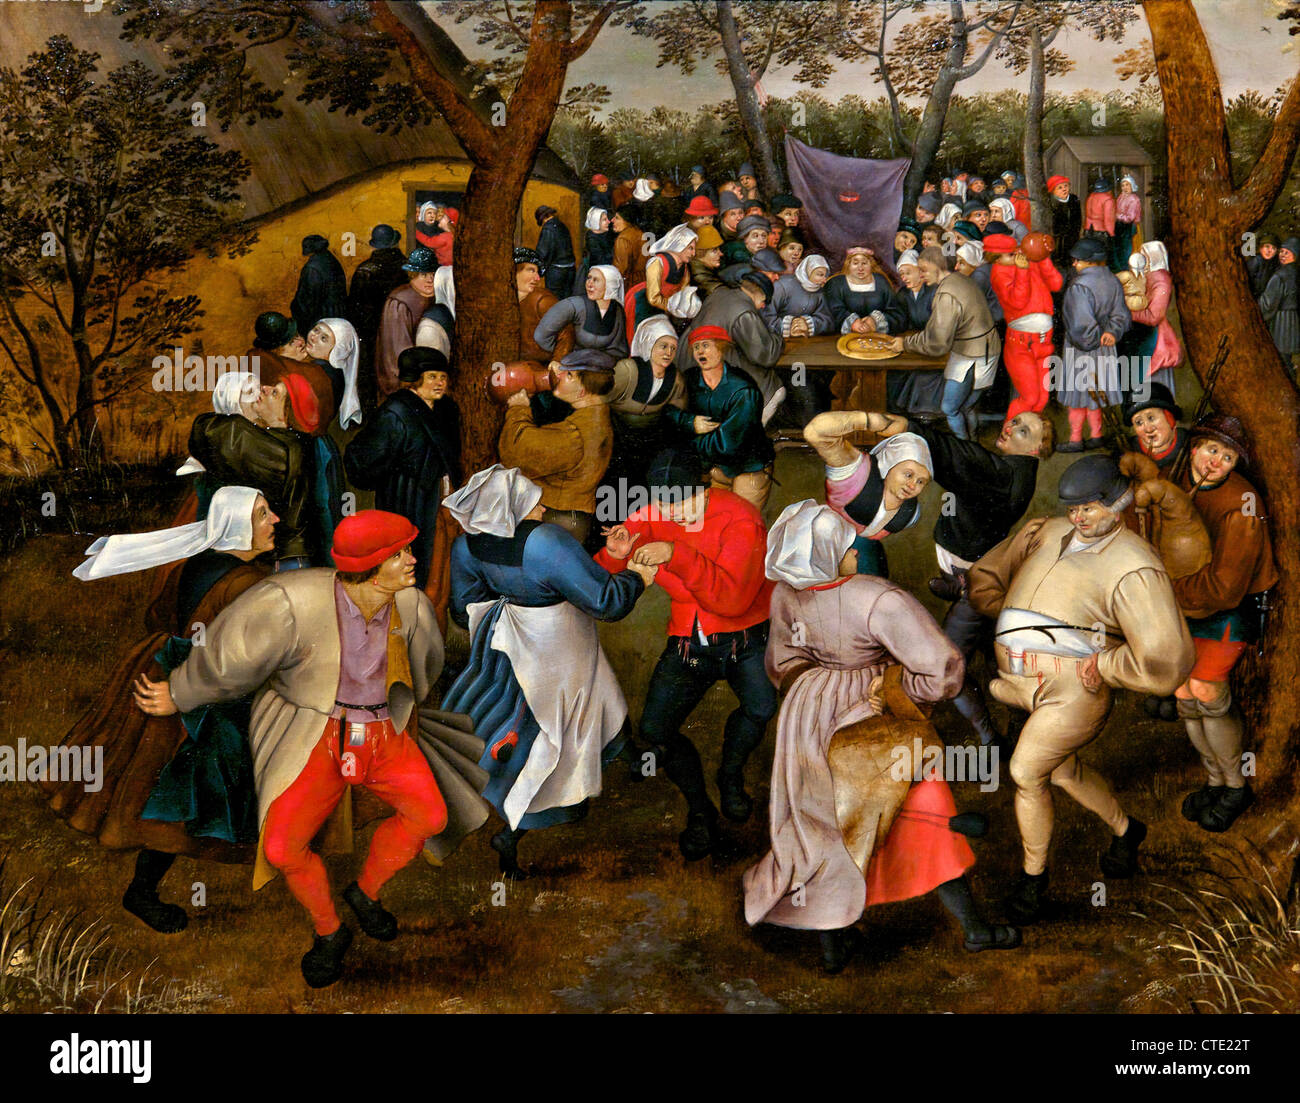 Peasant Wedding Dance, by Pieter Brueghel the Younger, 1607, Musees Royaux des Beaux-Arts, Brussels, Belgium, Europe Stock Photo